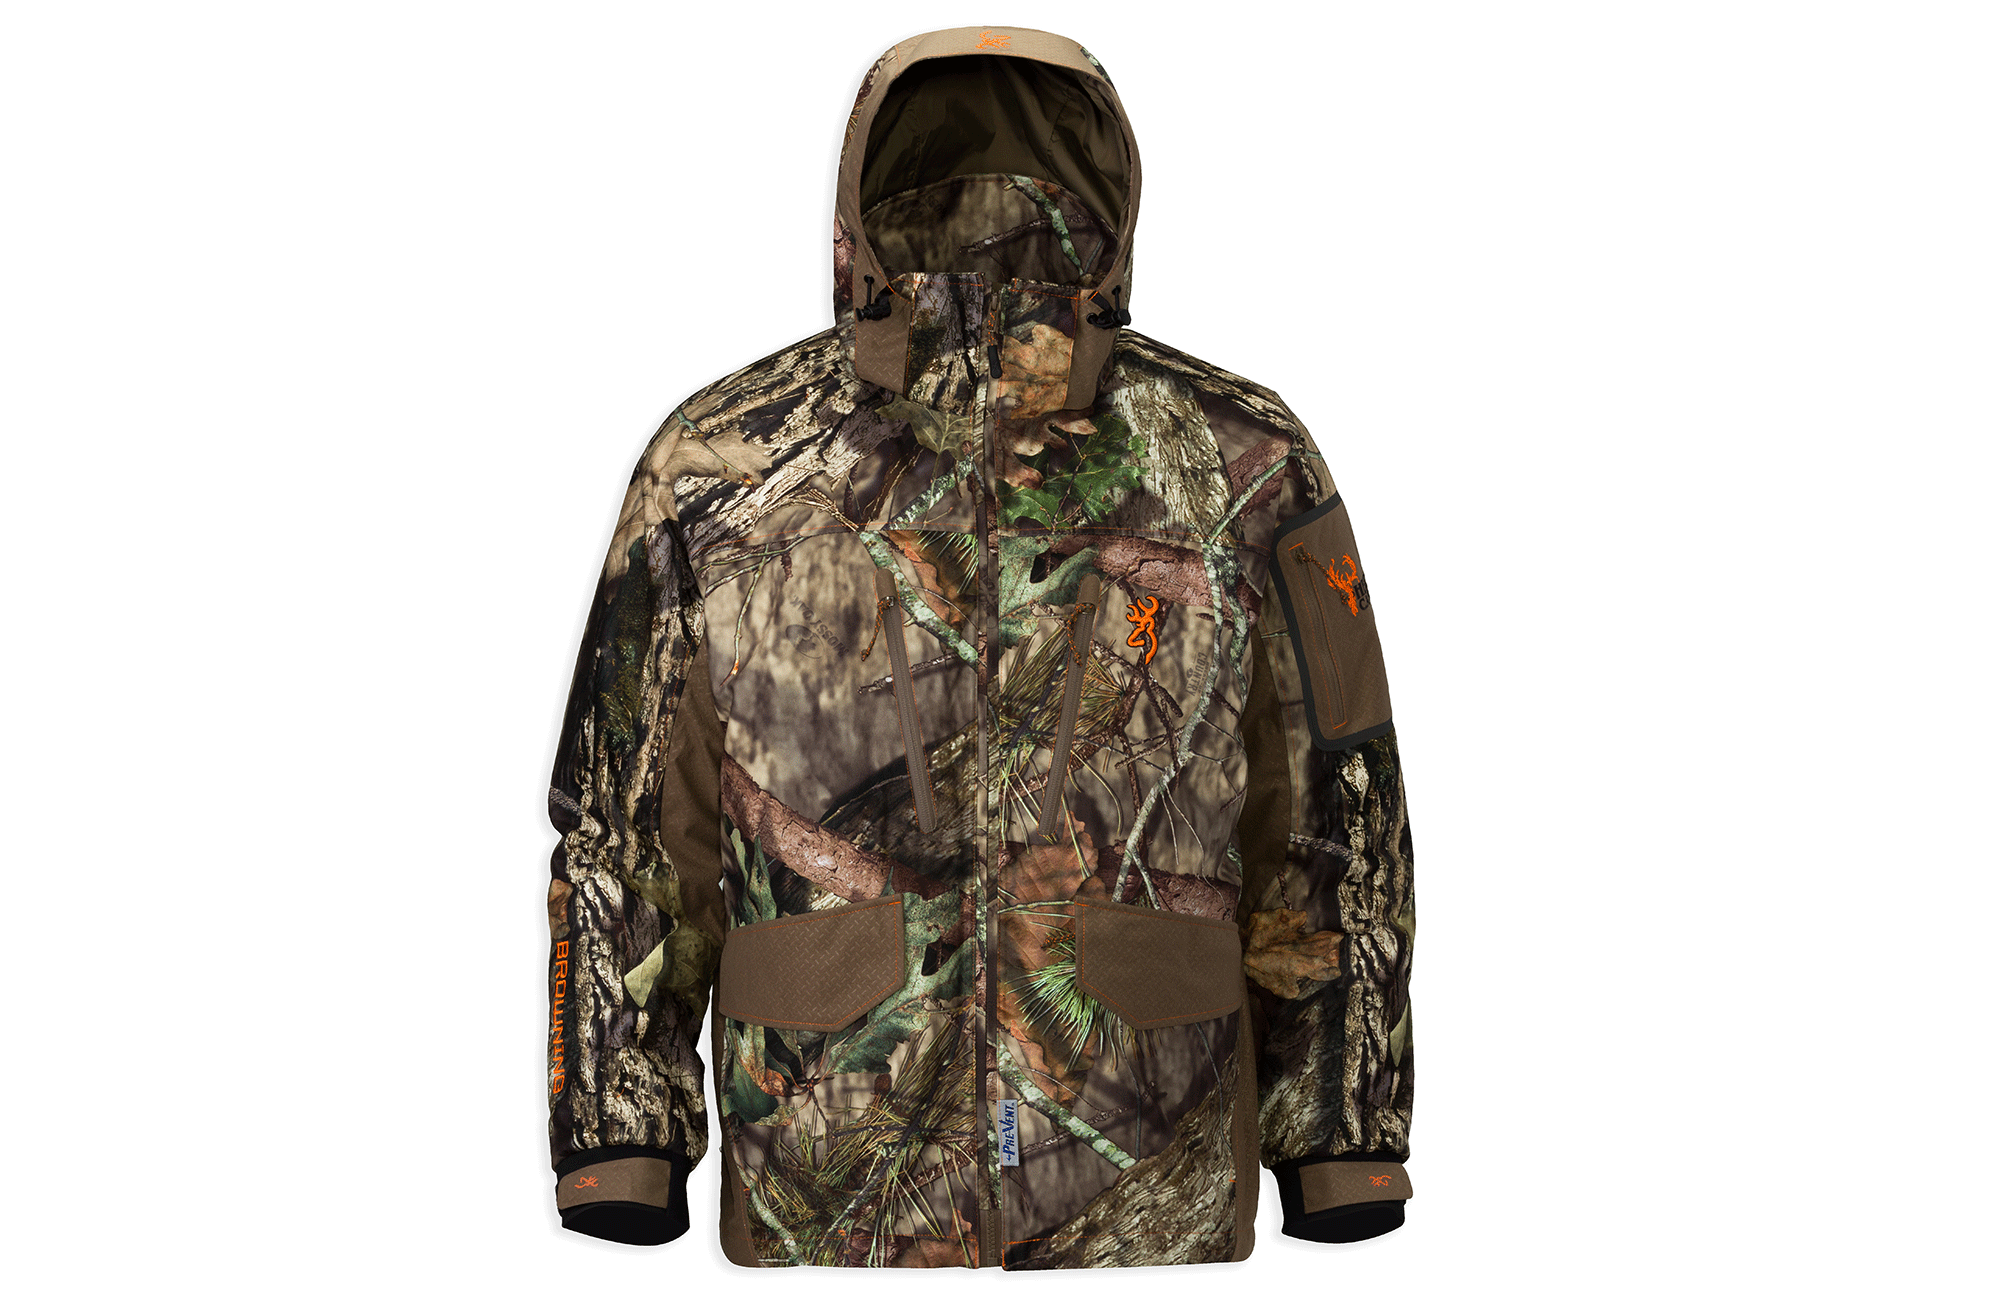 L Browning Hell's Canyon Veracity Jacket Capers